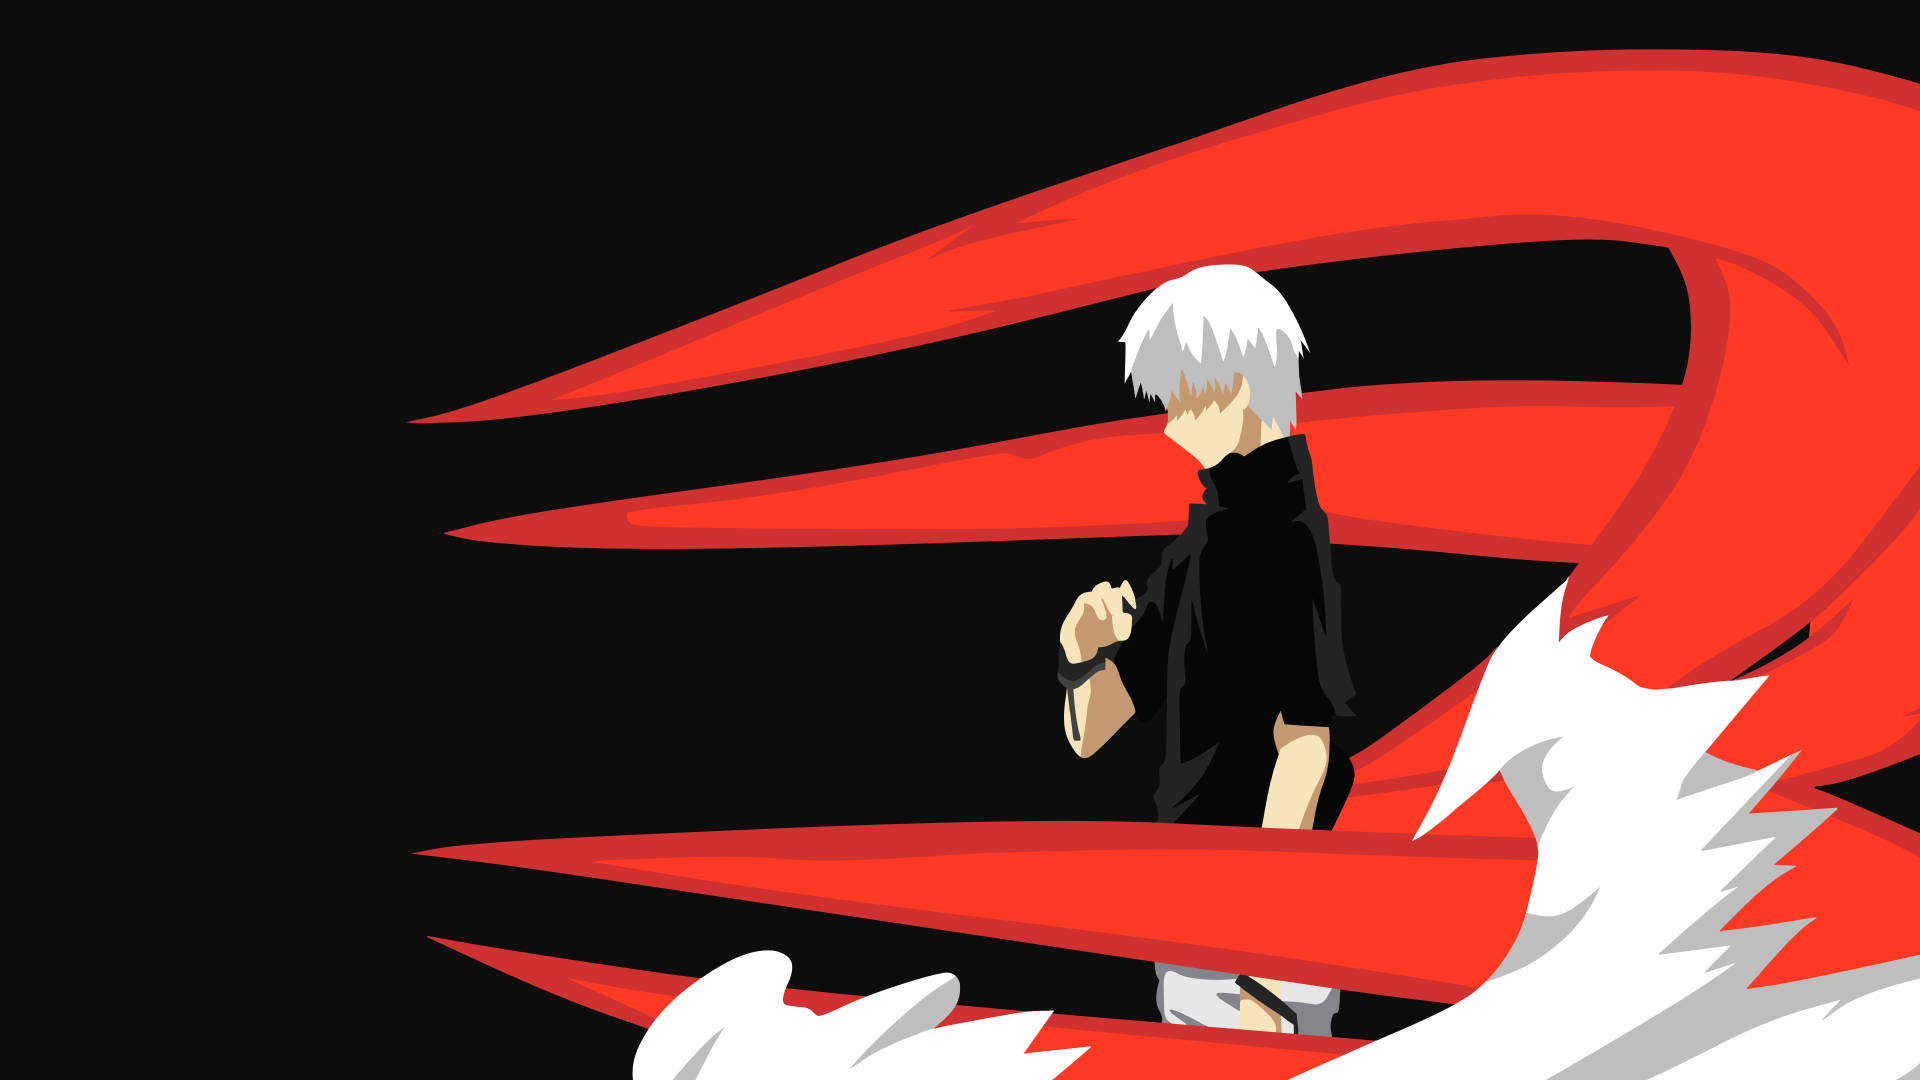 Tokyo Ghoul Minimalist Wallpapers Top Free Tokyo Ghoul Images, Photos, Reviews